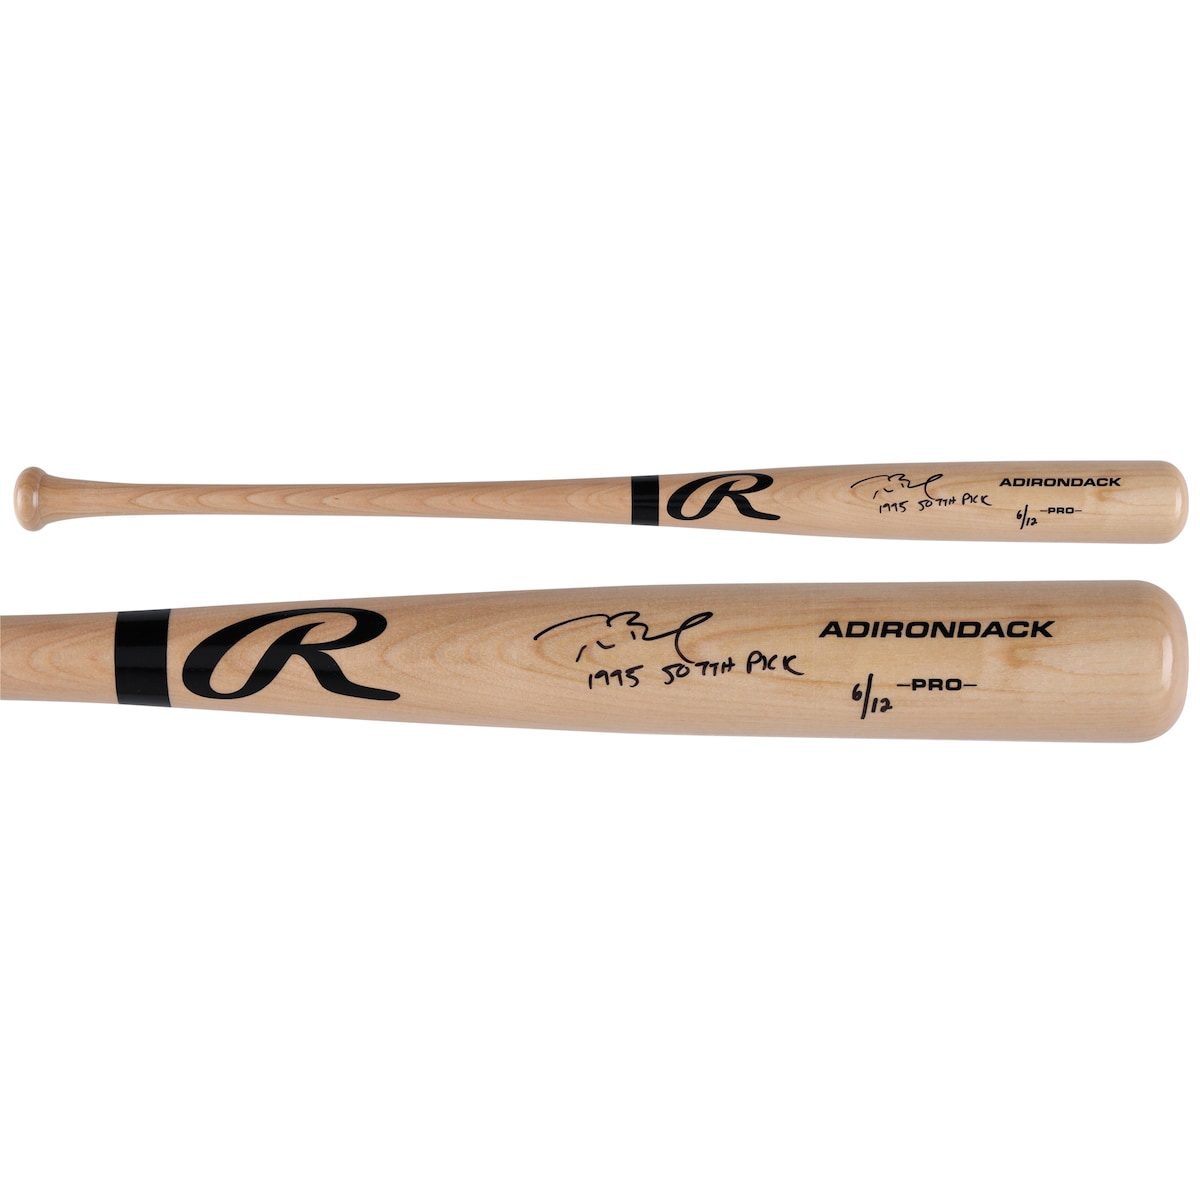 Tom Brady Montreal Expos Autographed Rawlings Pro Blonde Bat with "1595 507th Pick" Inscription - Limited Edition of 12